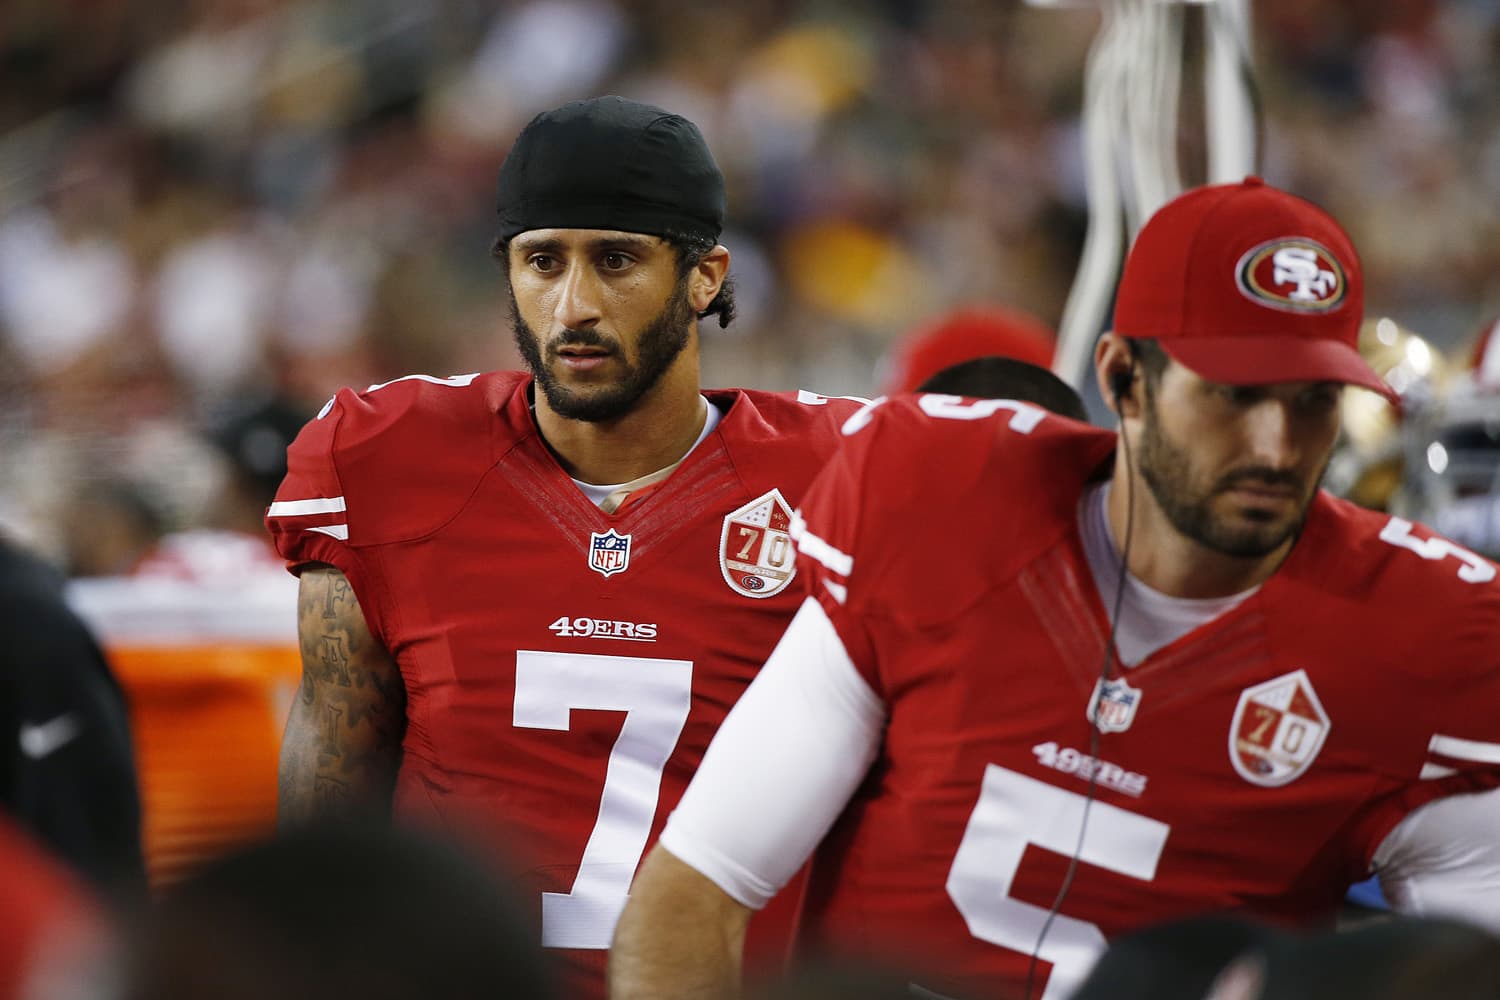 The Protest Of The Francisco 49ers Quarterback